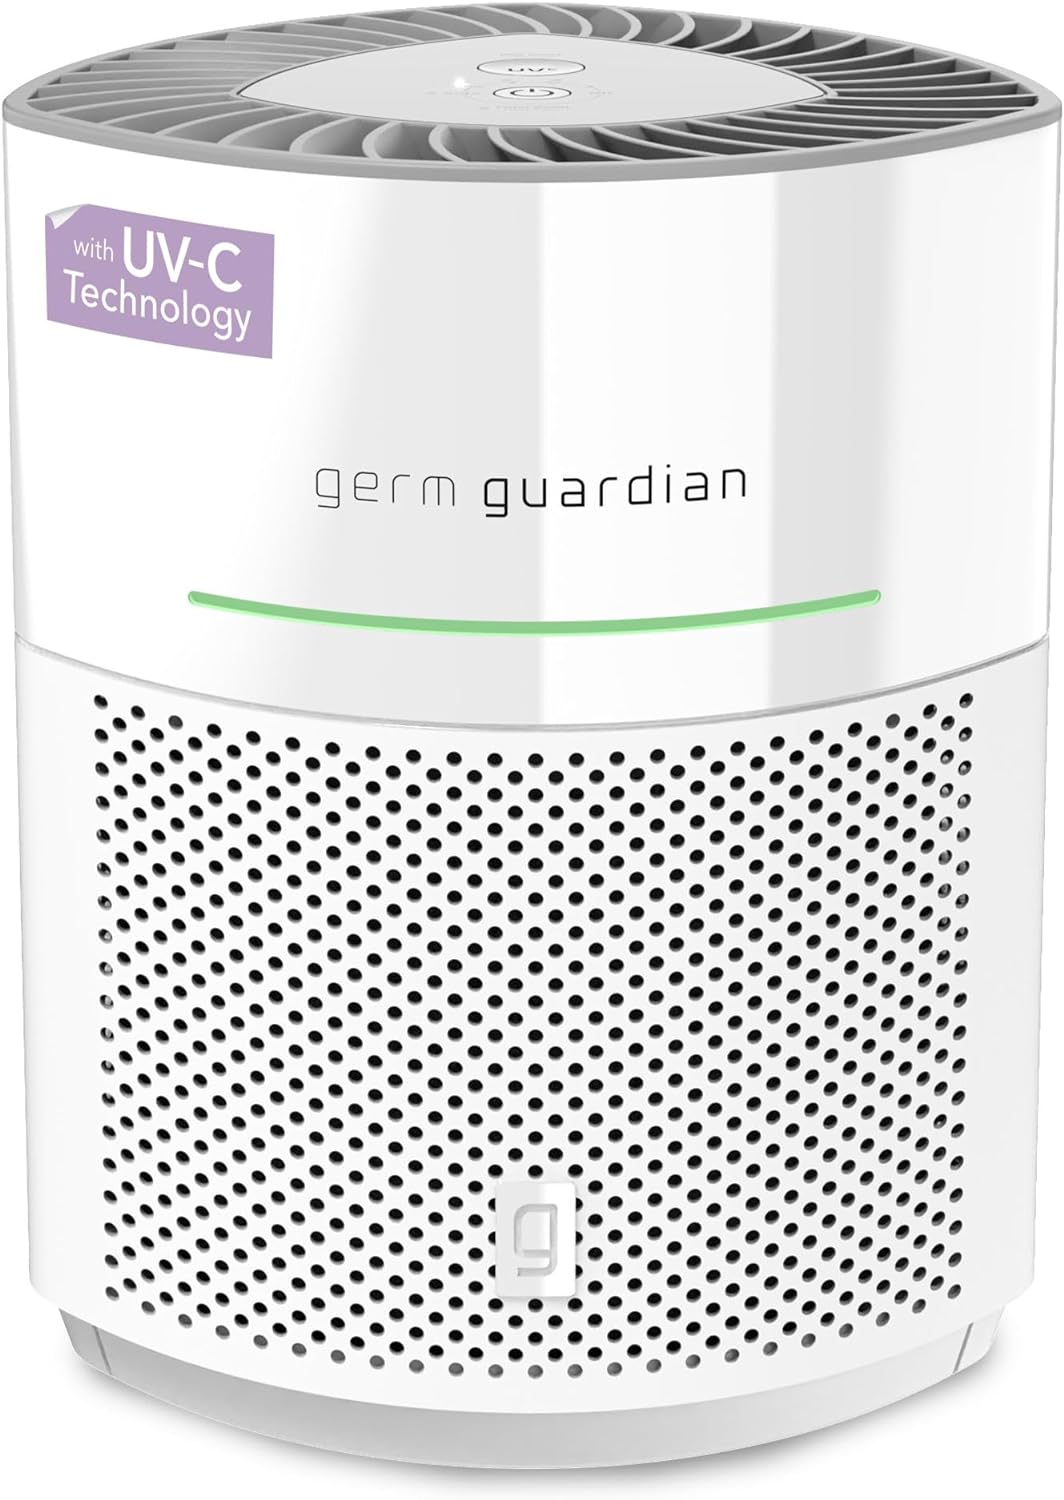 GermGuardian Airsafe  Home Air Purifiers, HEPA Air Purifiers for Home, UV C Light, Air Quality Sensor, 360 HEPA Filter, Covers 1040 Sq.Ft, White AC3000W